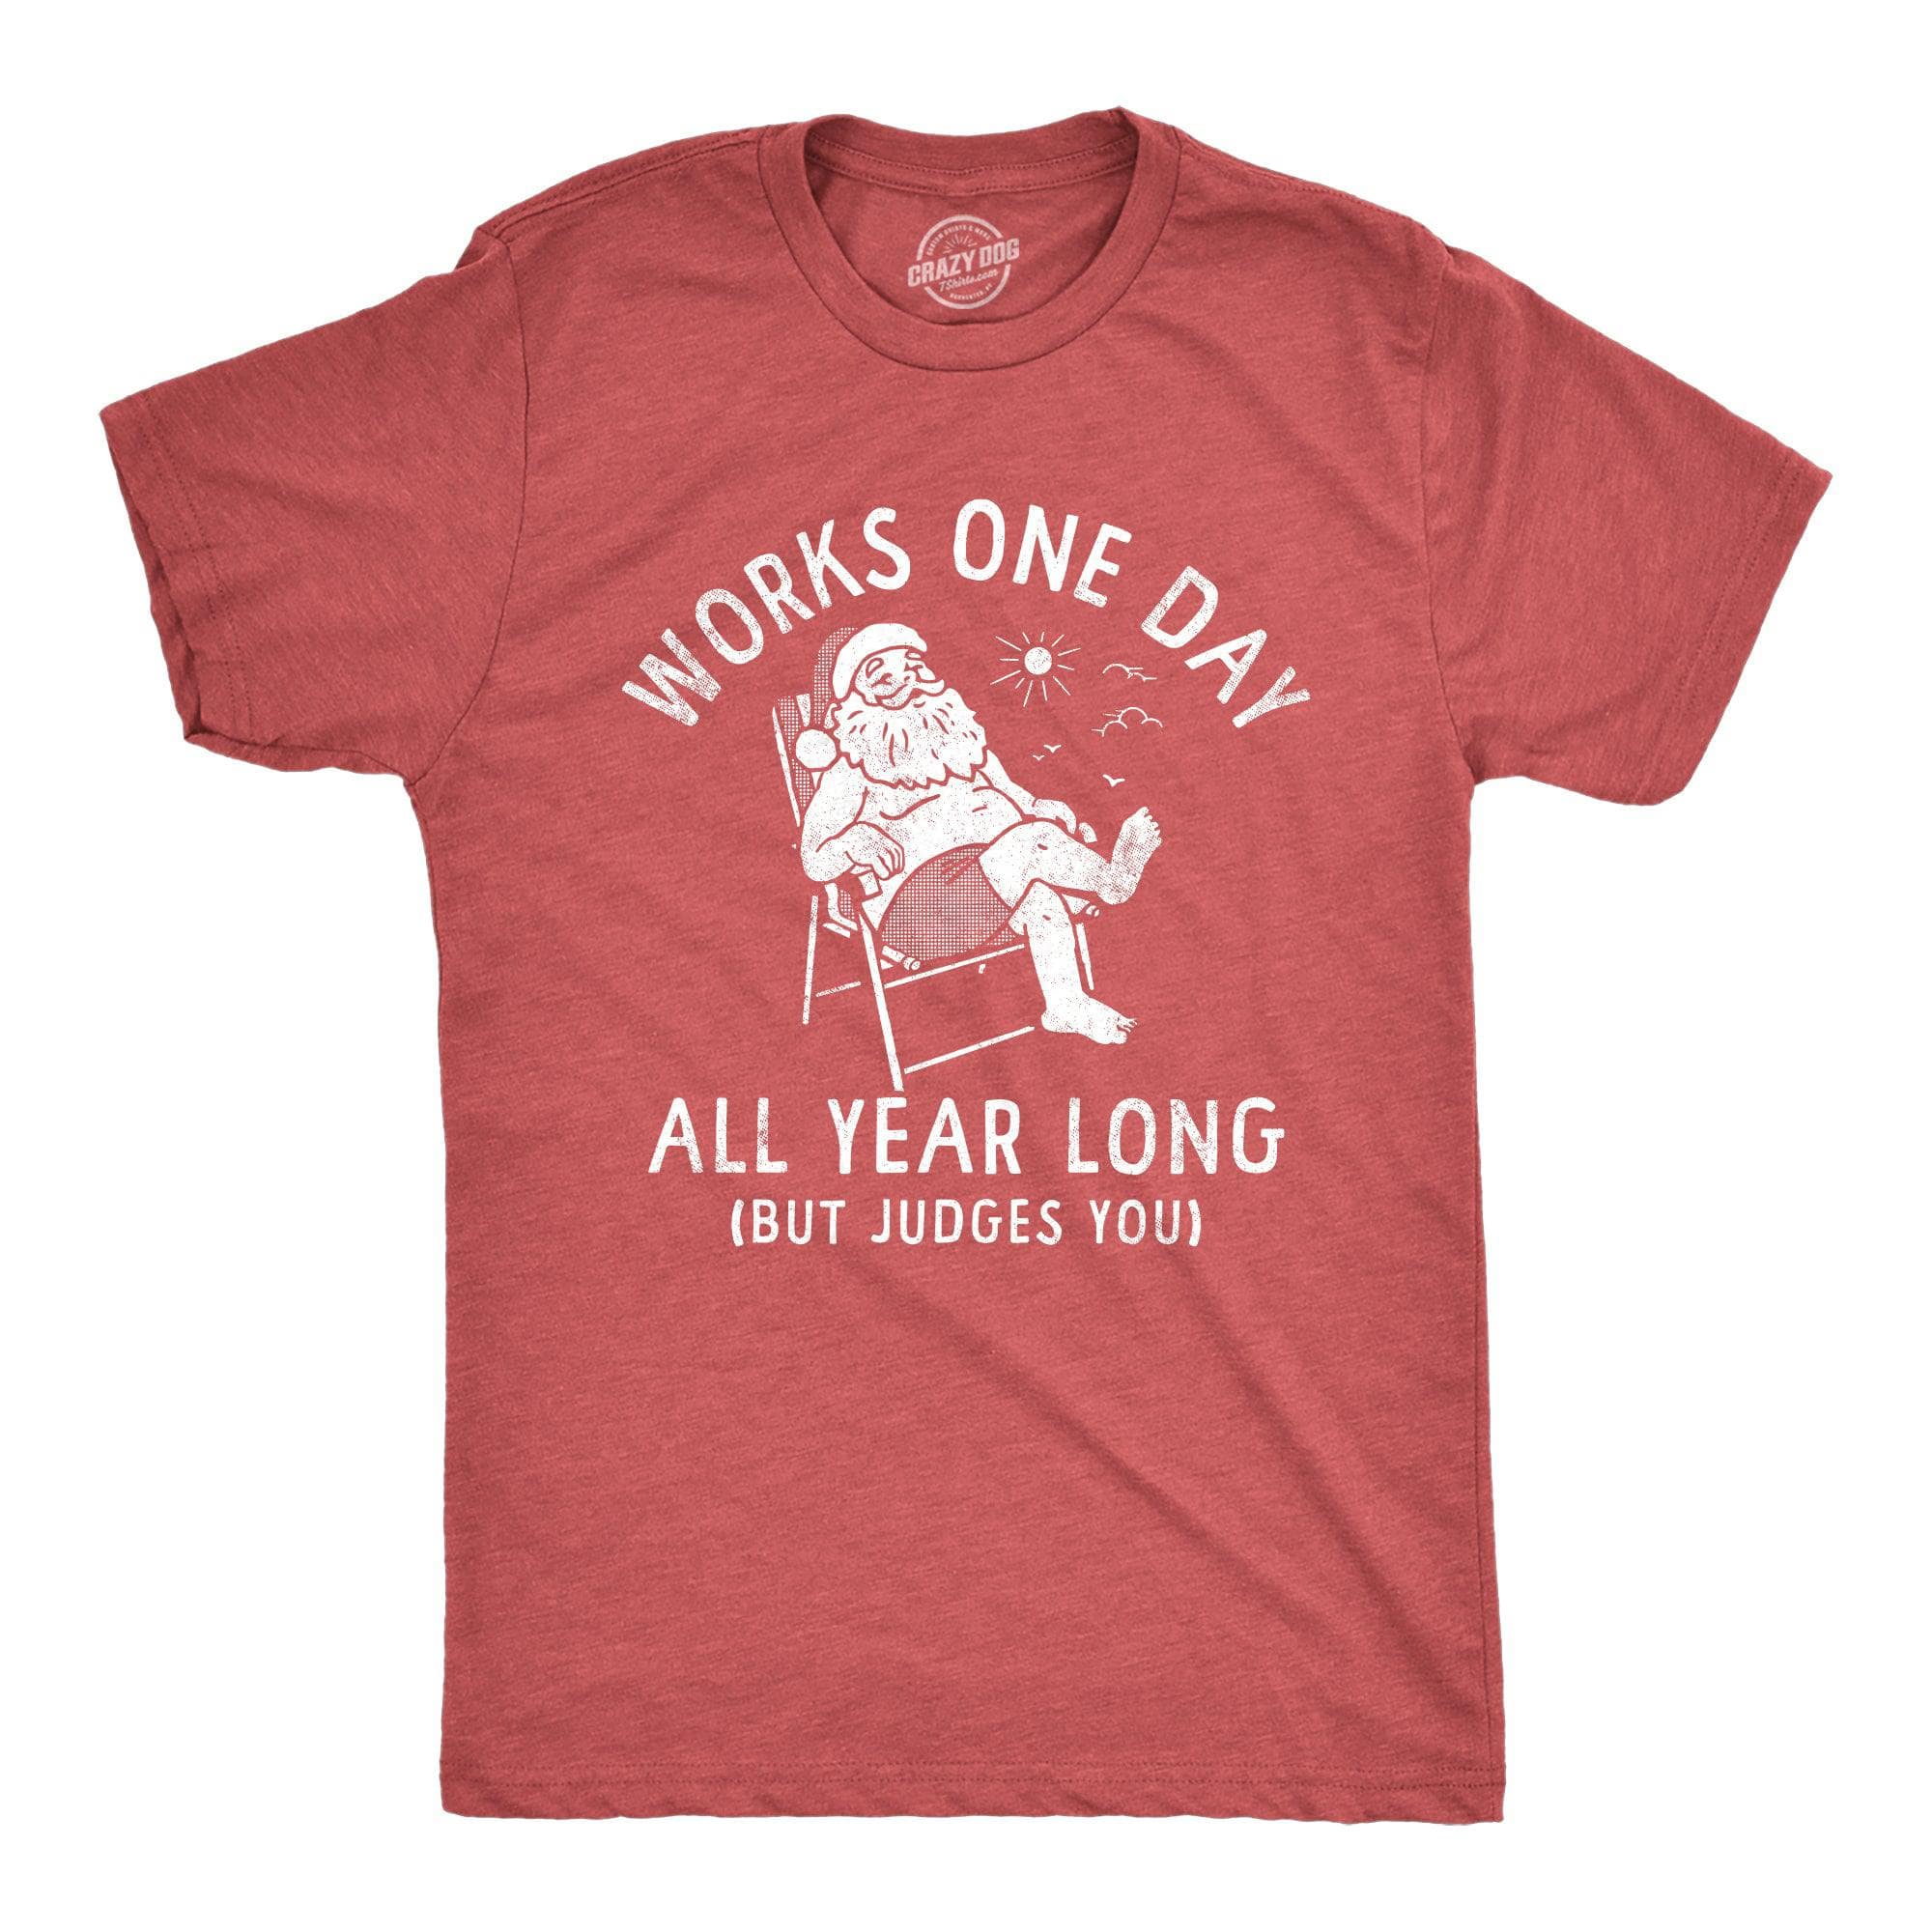 Works One Day All Year Long Men's Tshirt  -  Crazy Dog T-Shirts